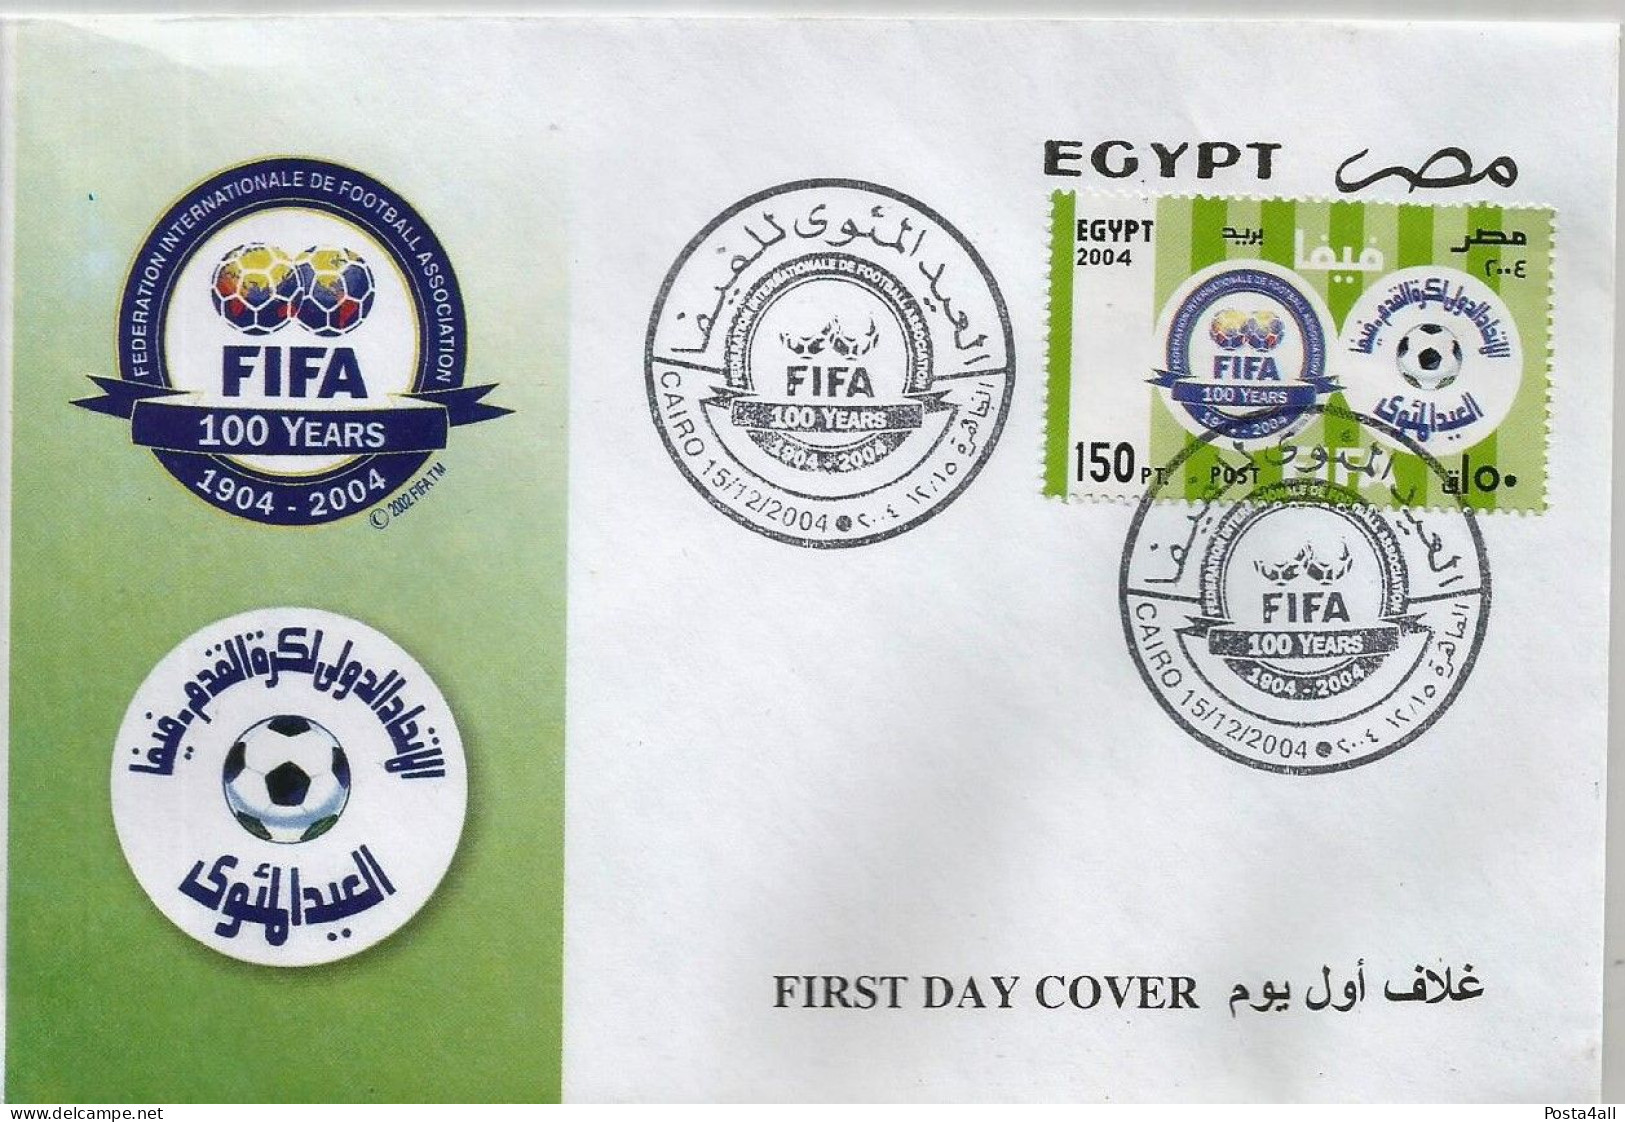 Egypt  - 2004 The 100th Anniversary Of FIFA (Federation Internationale De Football Association)  - Complete Issue - FDC - Covers & Documents